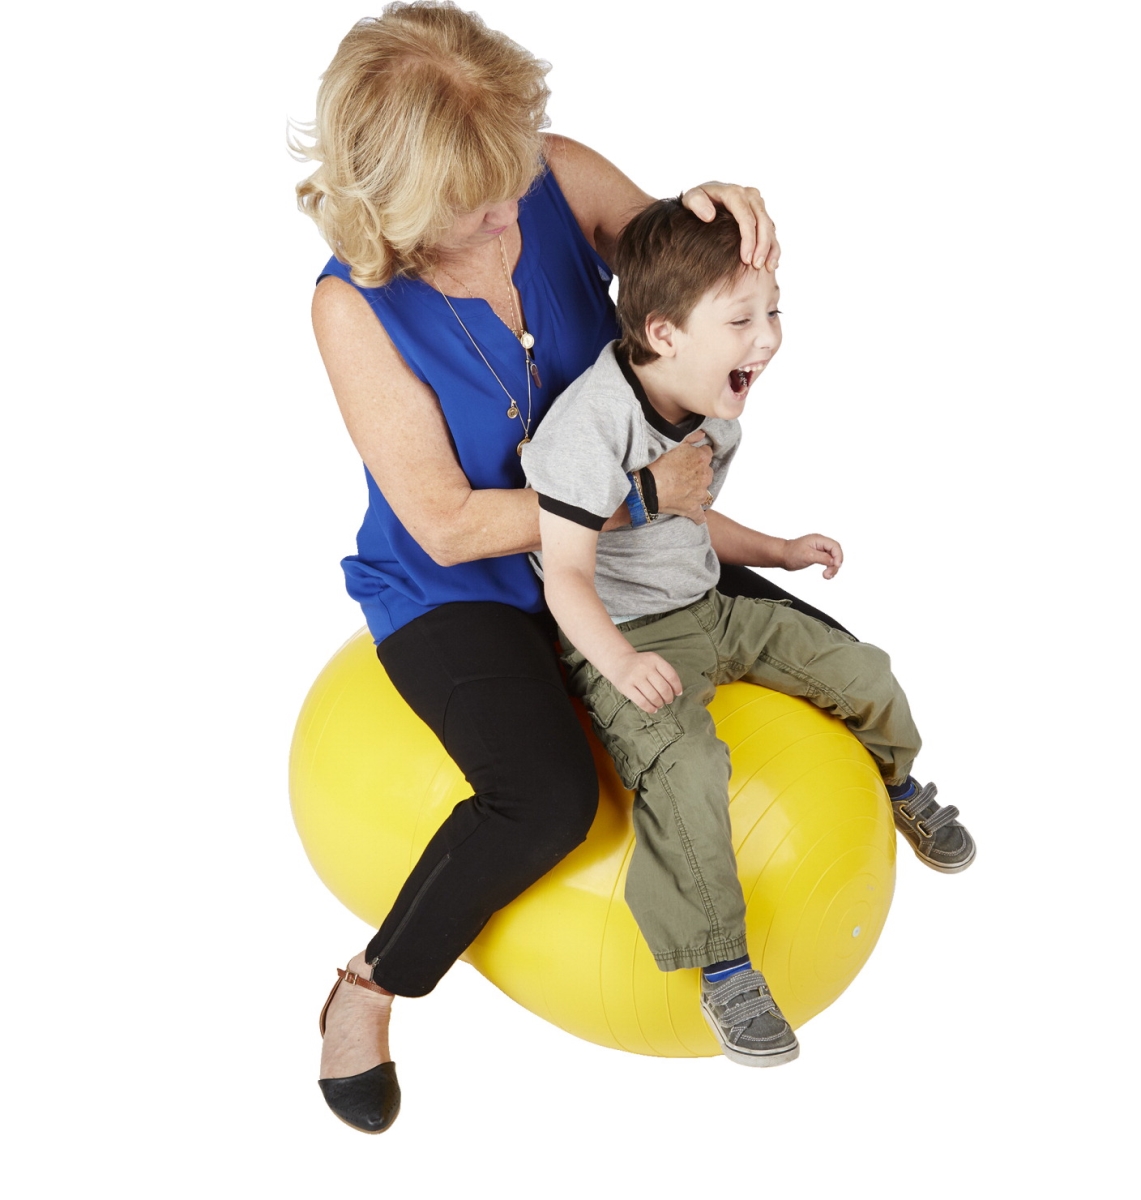 Gymnic 21.75 In. Physio-roll Ball, Yellow